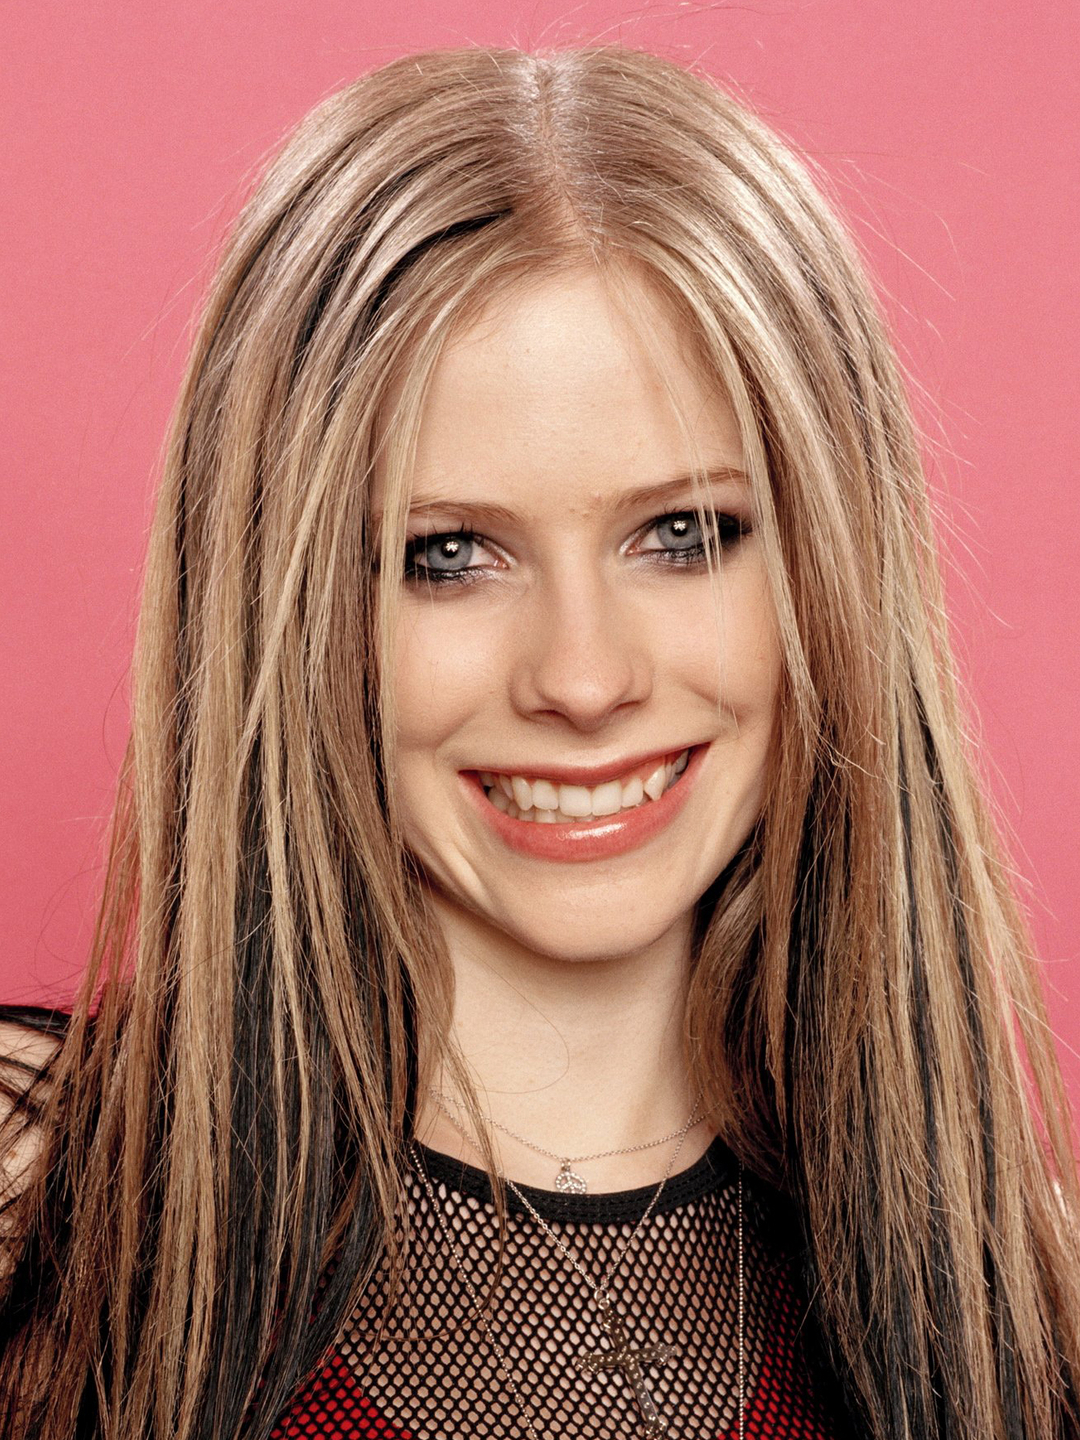 Avril Lavigne early life